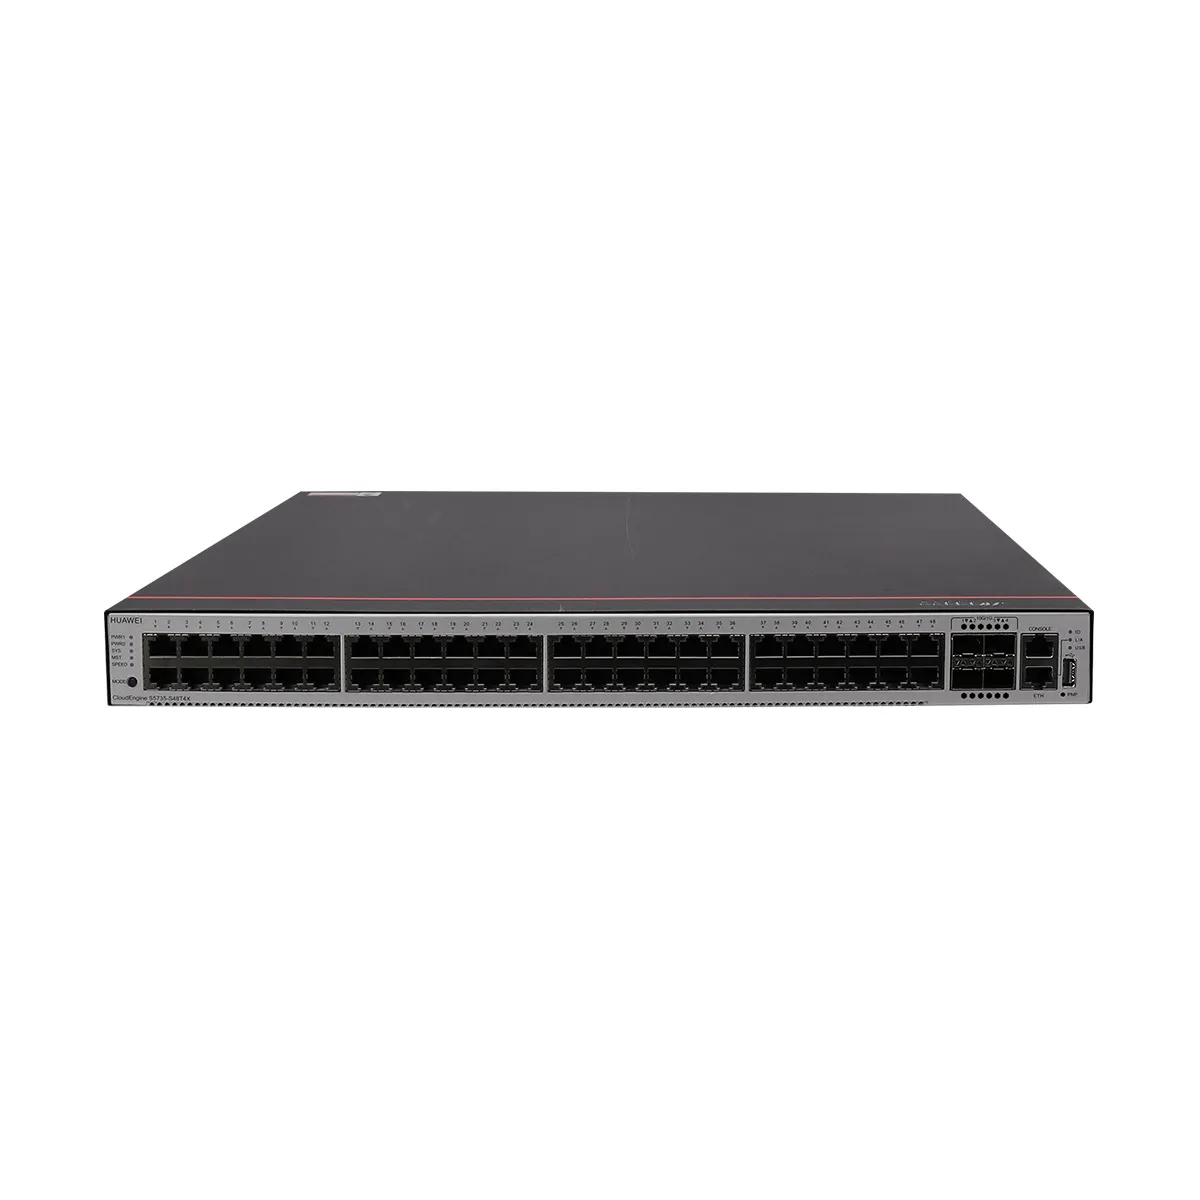 S5735-L24T4S-A1 S5735-L24P4S-A1 S5735-L24T4X-A1 Switch 24x10/100/1000BASE-T ports 4xGE SFP ports AC power + Software for Huawei